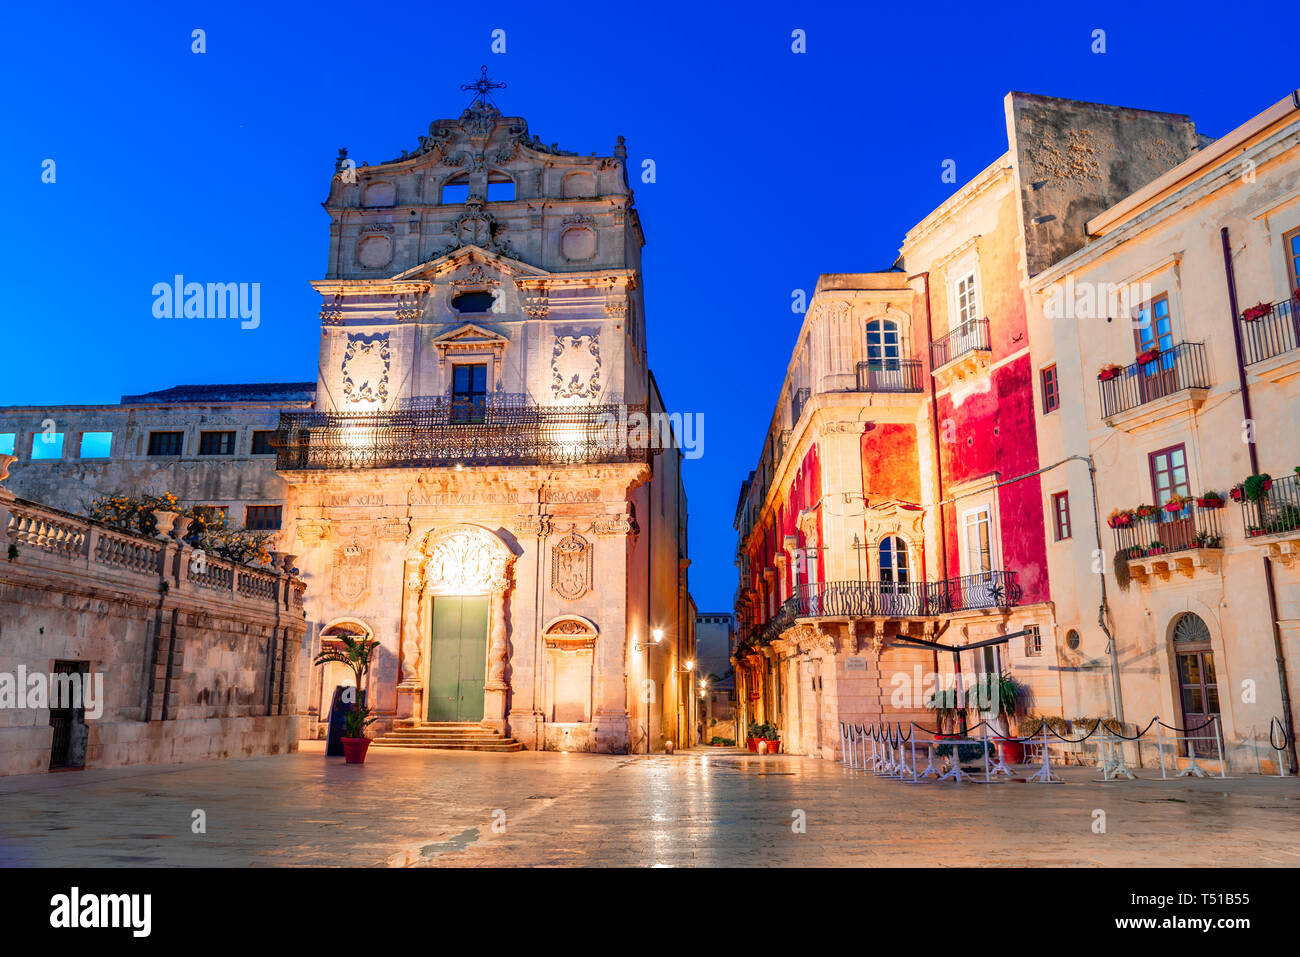 Siracusa, Sicily island, Italy: Night view of the  Church with the Burial of Saint Lucy, Ortigia, Syracuseon the island of Sicily, Italy Stock Photo